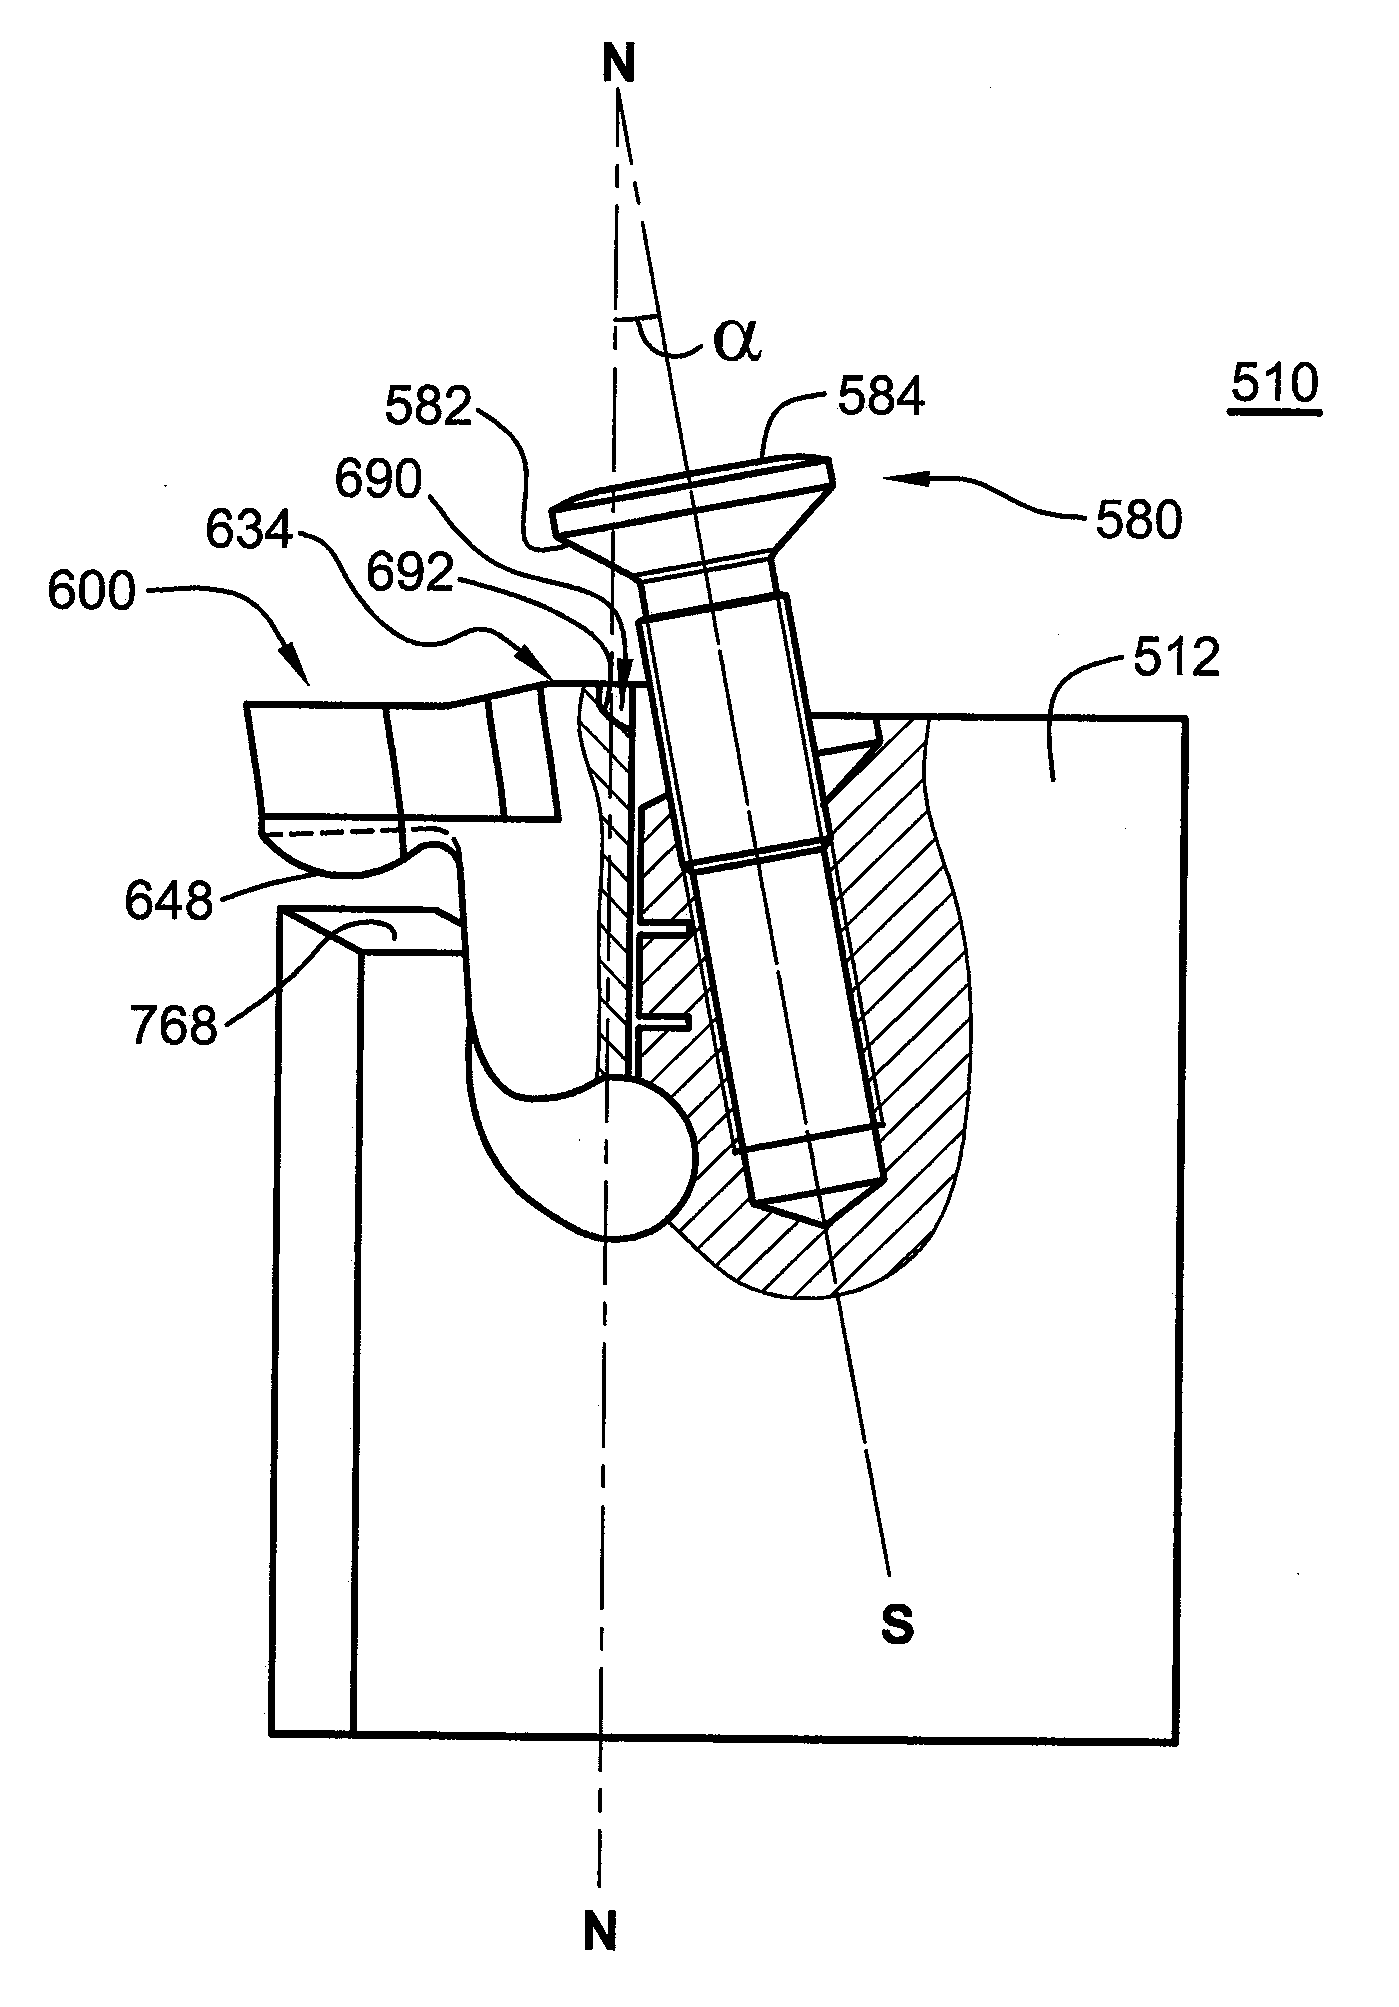 Cutting Tool Having Cutting Insert Secured By Non-Penetrating Abutment of a Threaded Fastener